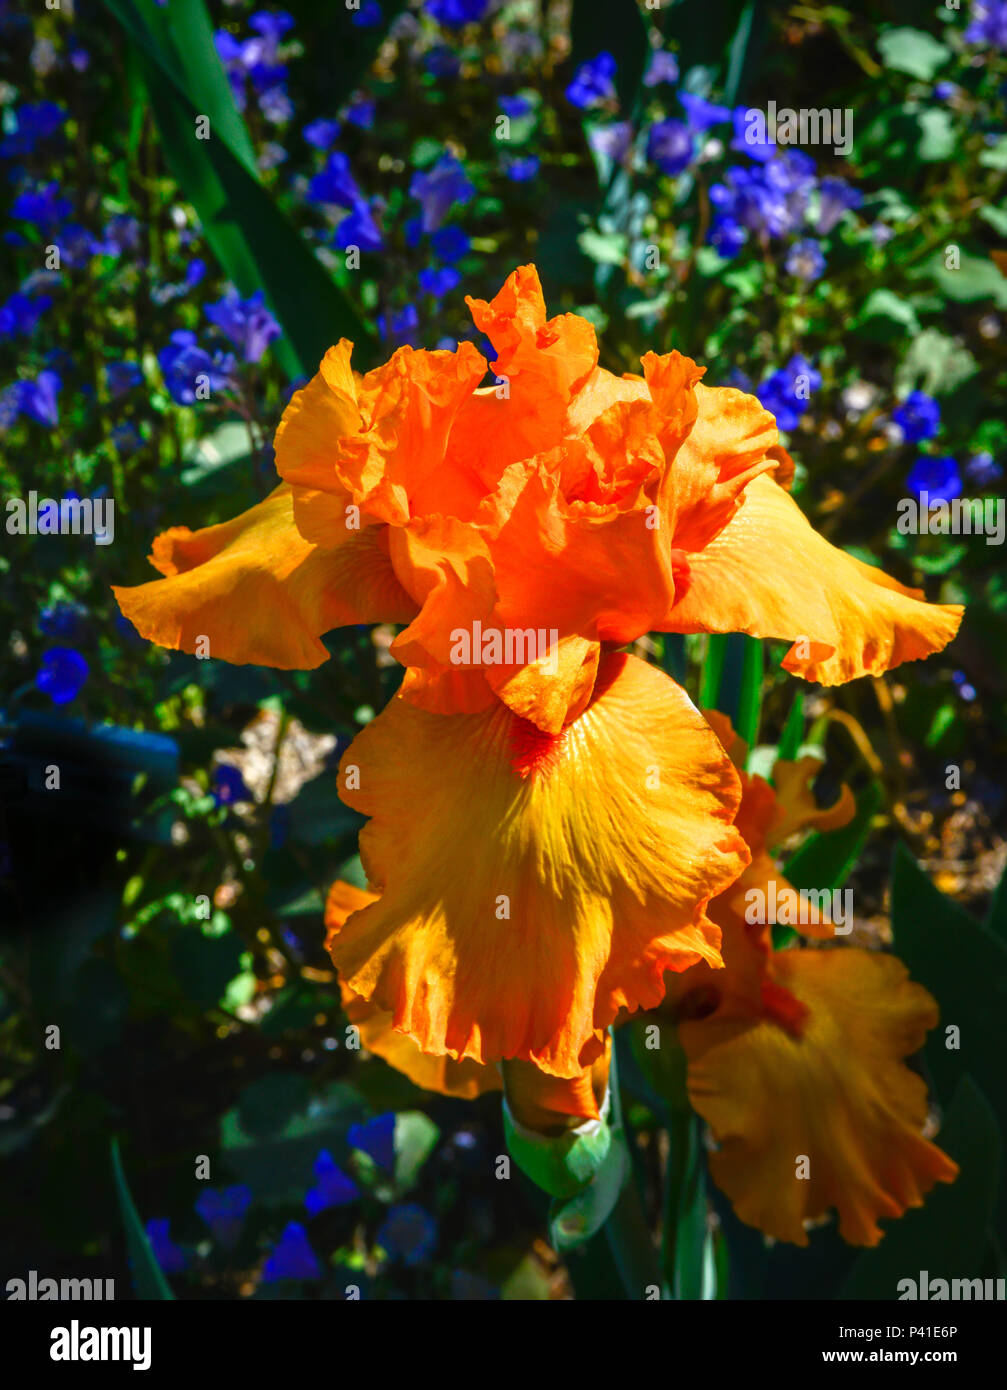 A vivid orange bearded Iris bloom in a  garden surrounded by a field of soft focus violets Stock Photo